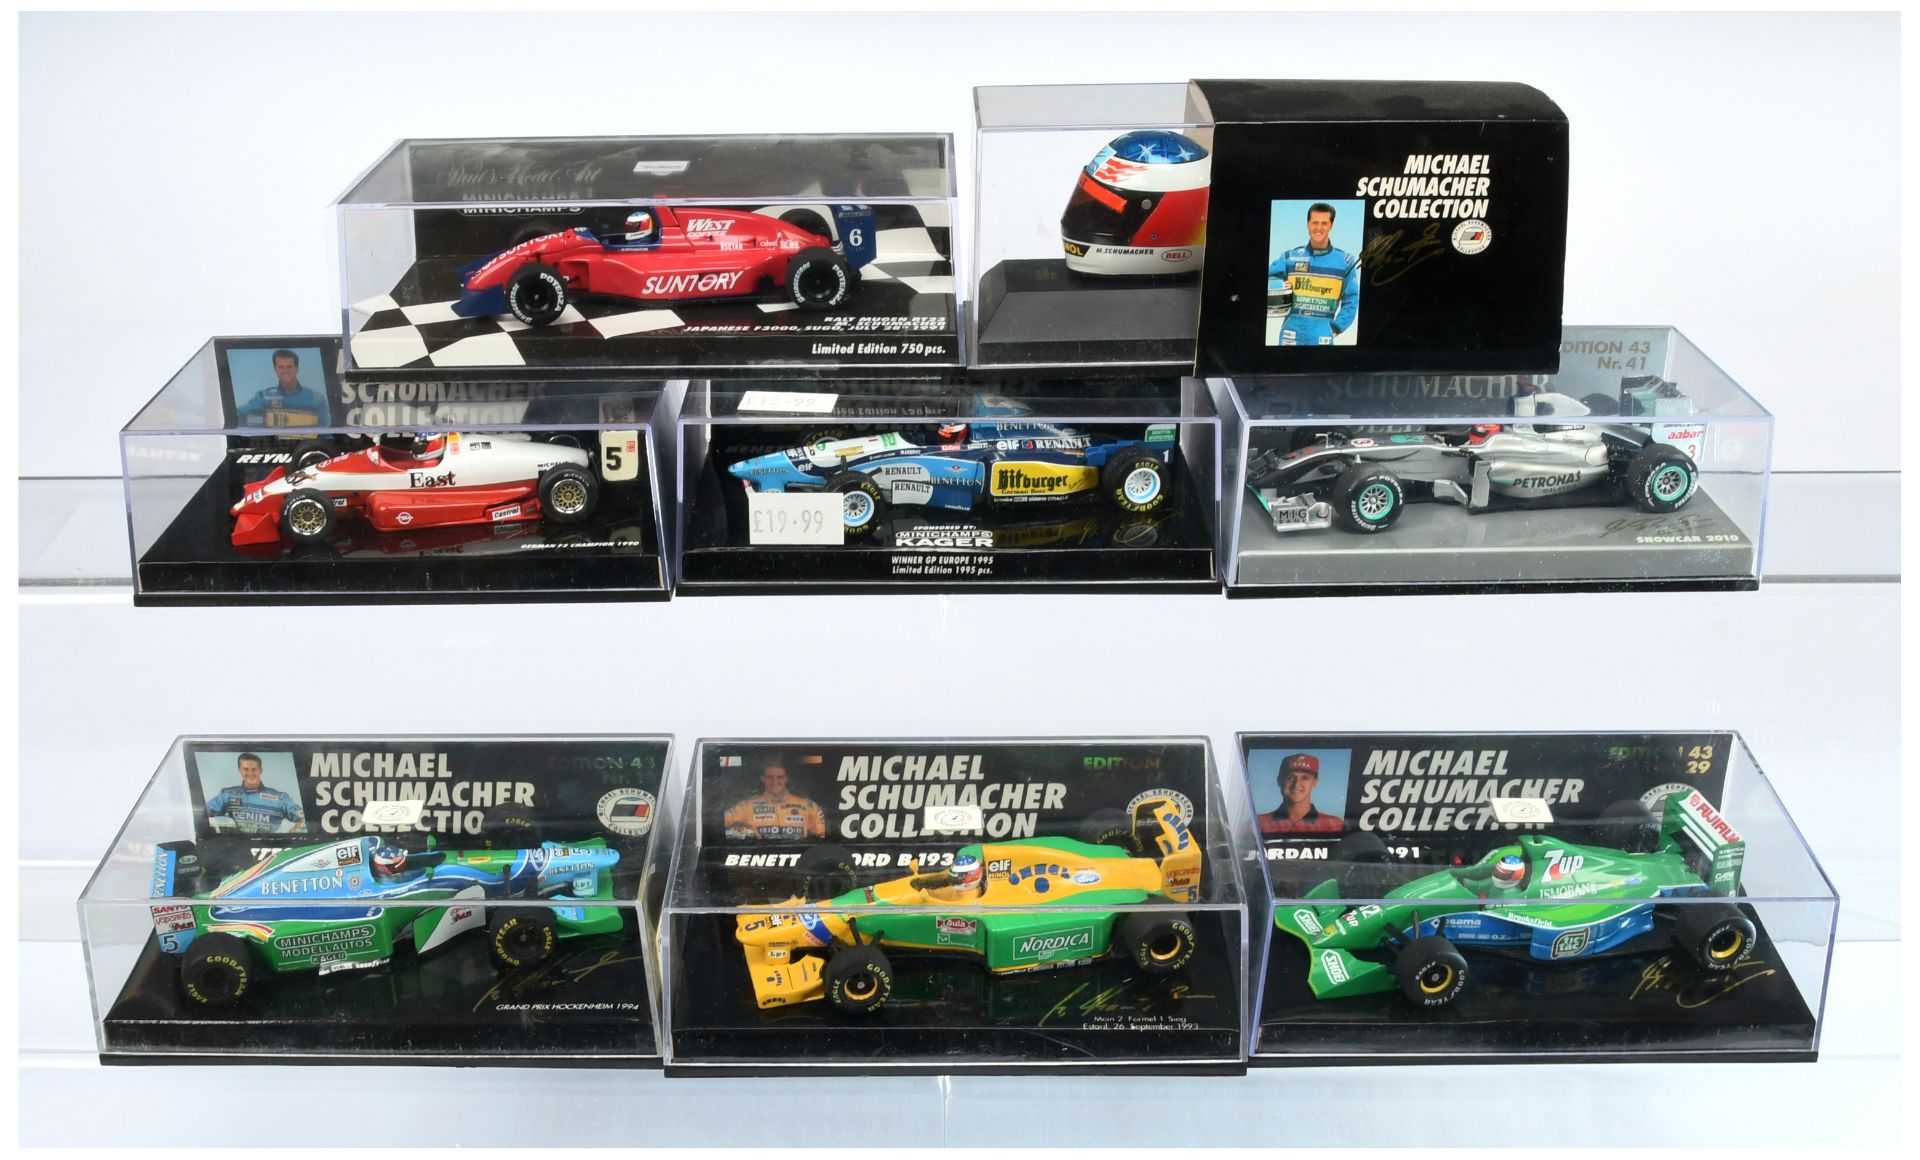 Minichamps (1/43rd) Group Of 8 "M Schumacher" Group To Include  - 510 430007 Reynard F3, 510 9143...